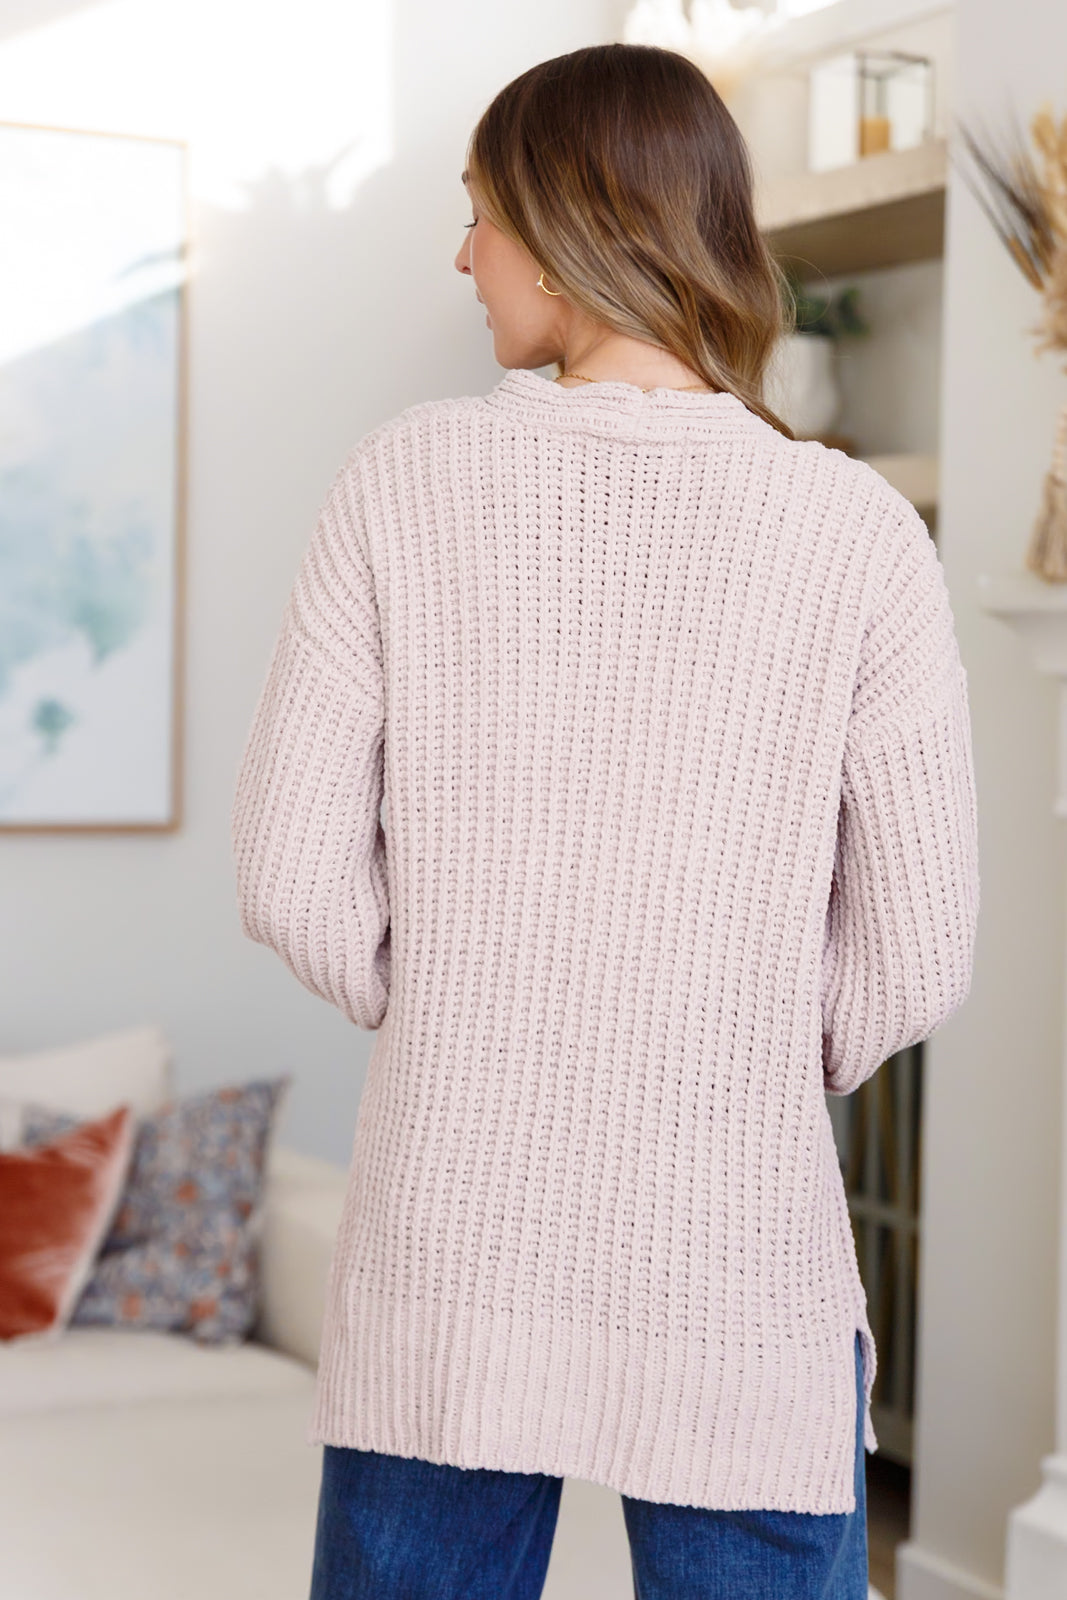 Website Exclusive Mother Knows Best Buttoned Down Cardigan